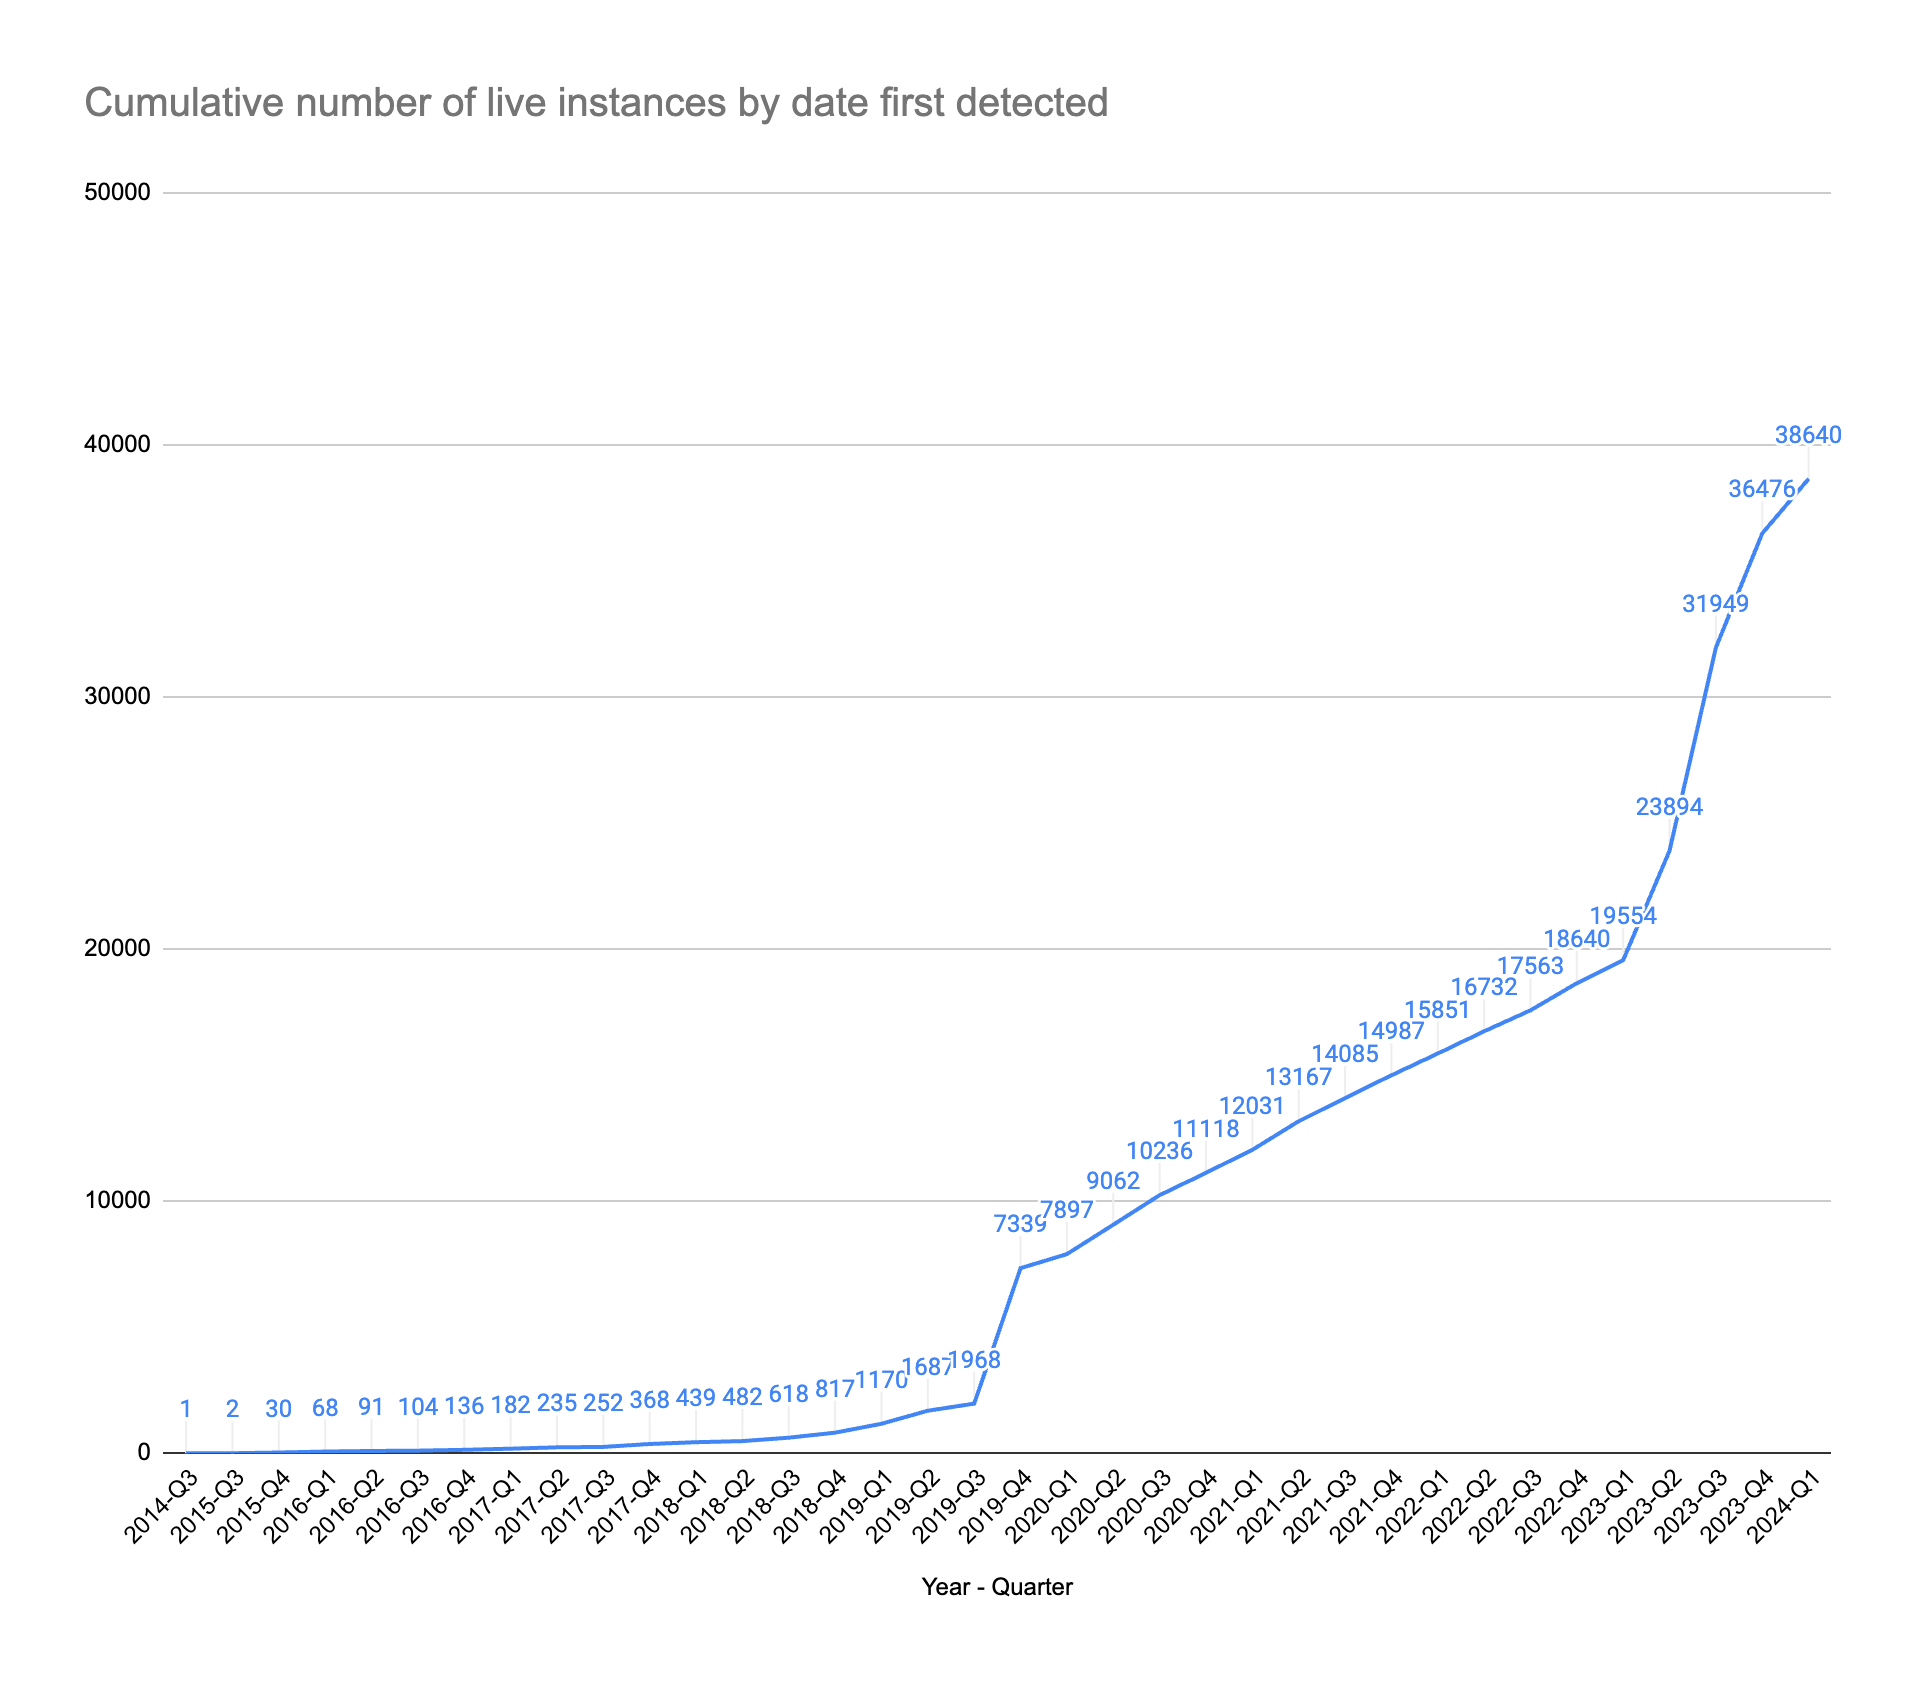 Chart showing cumulative number of live Mautic instances over time, with a strong uptick from 2023